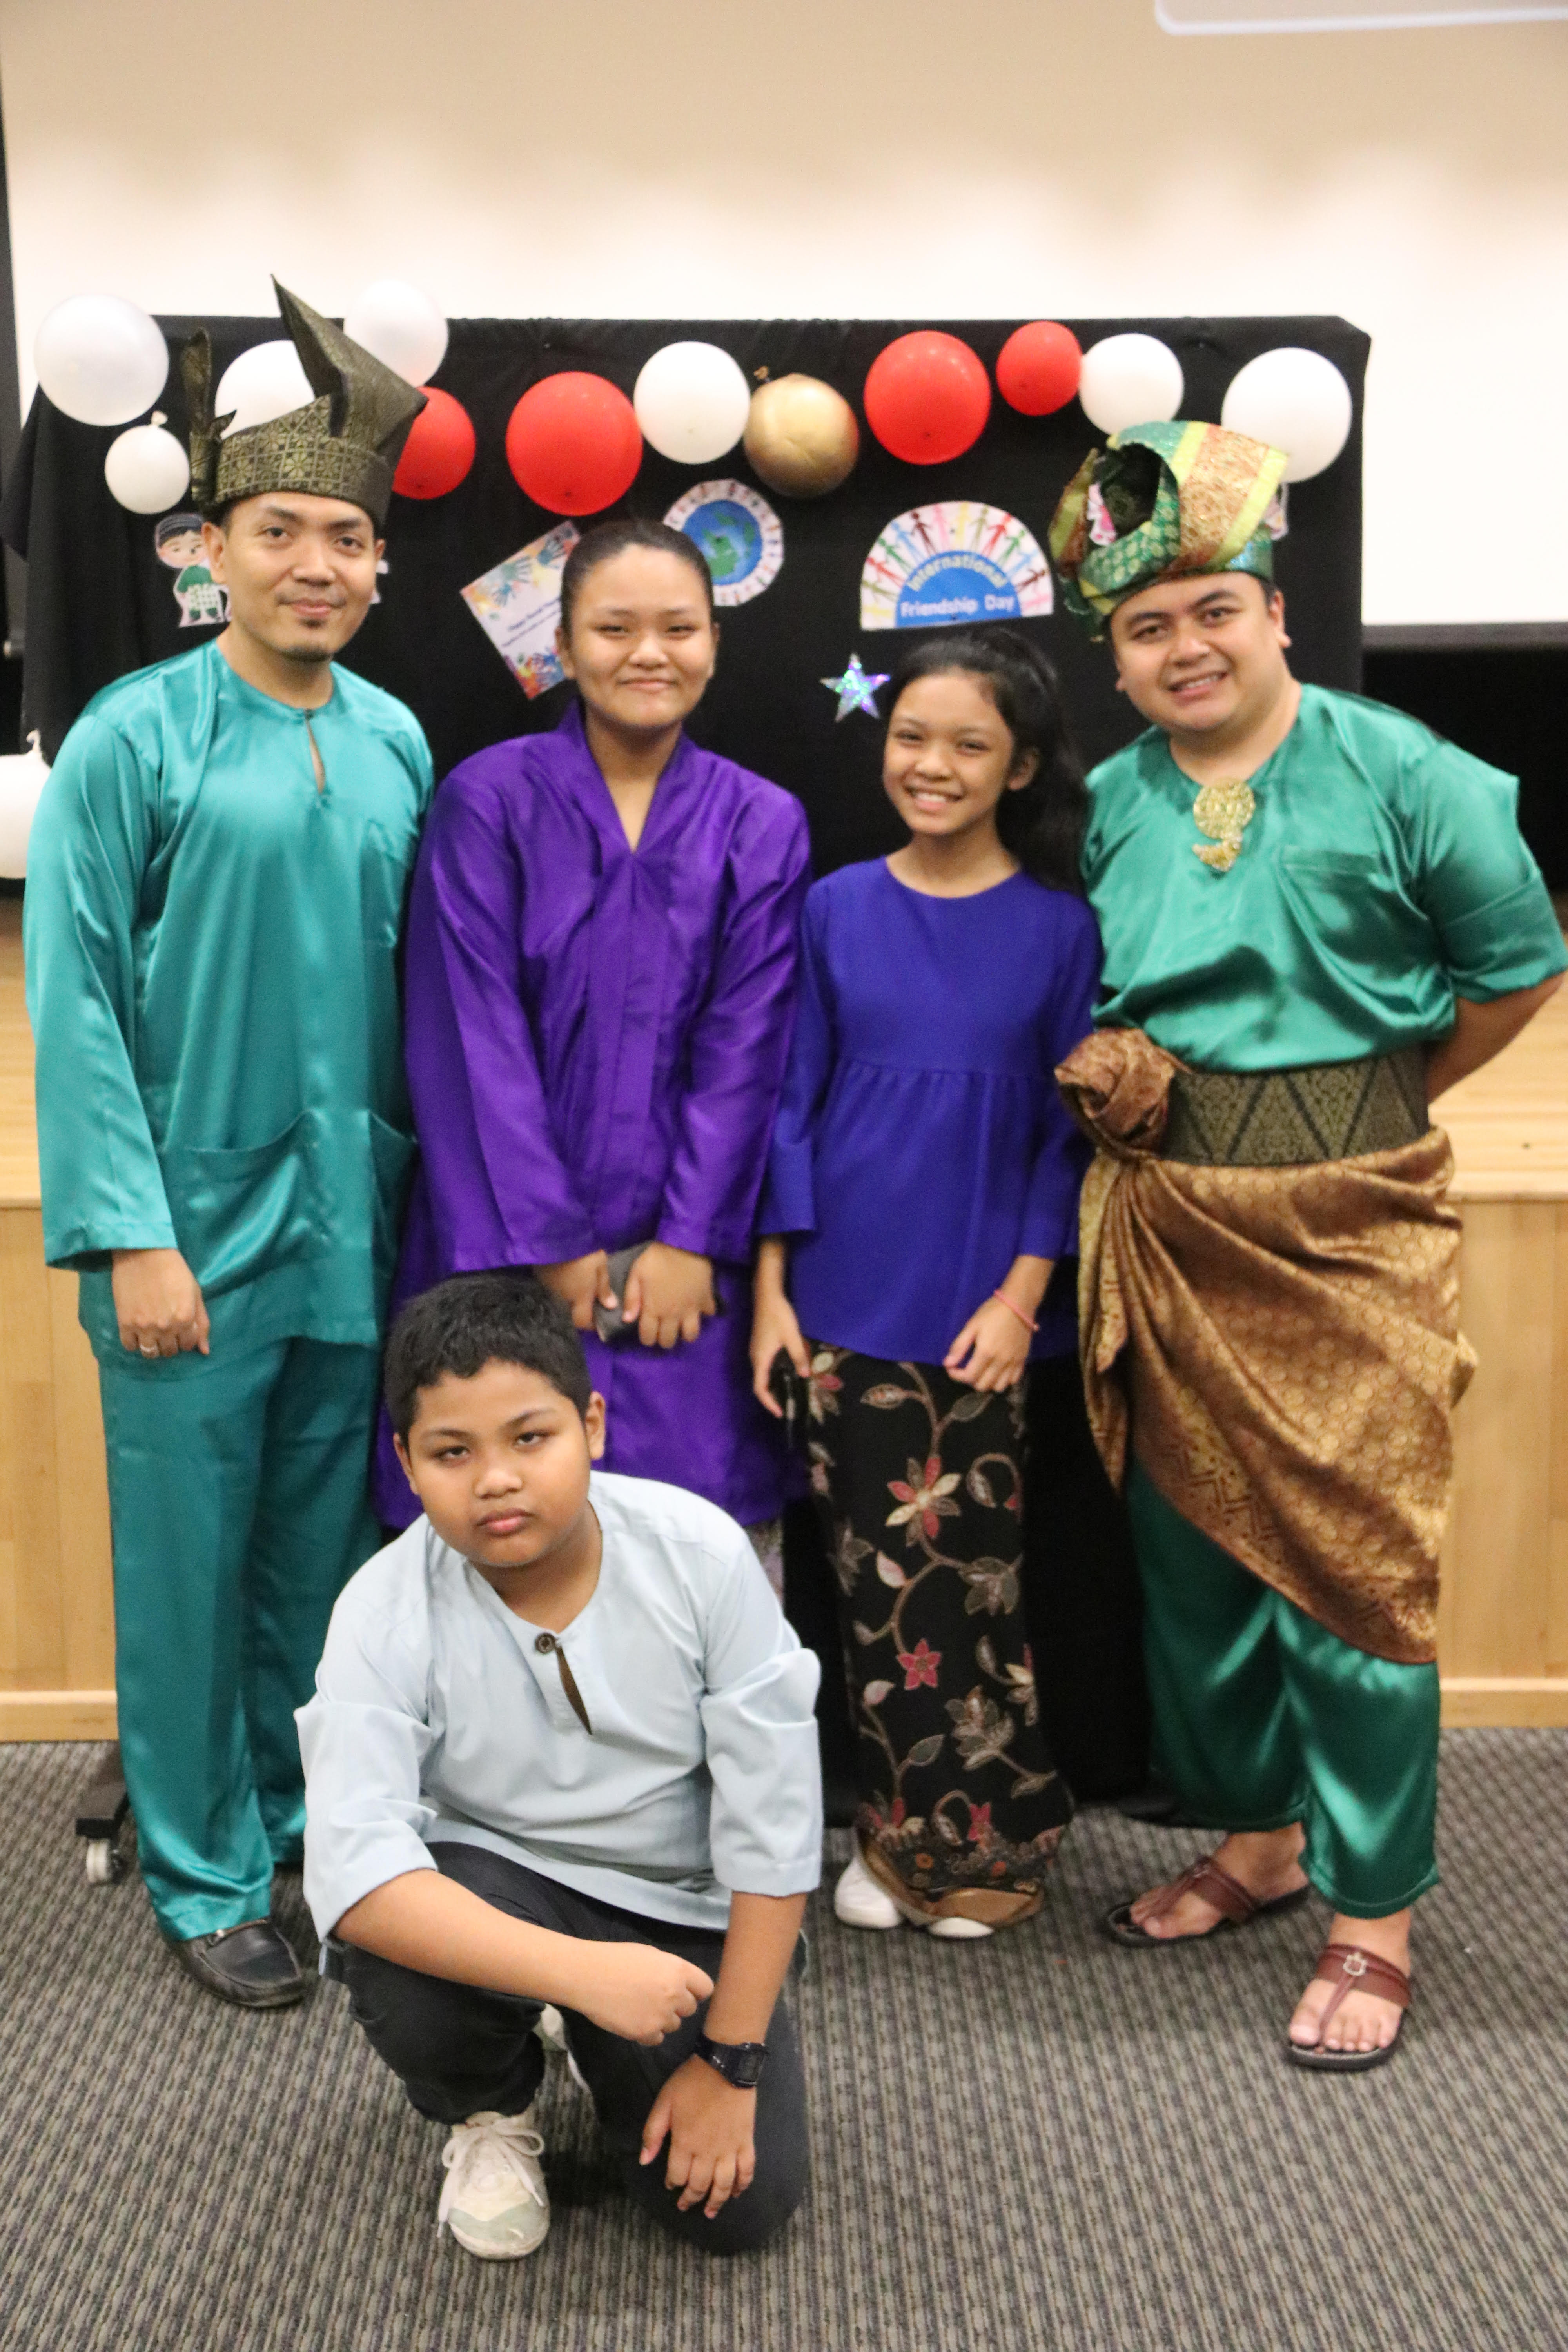 Mr Amirul (far right) helps his students gain confidence on stage. (Photo taken before Covid-19.)